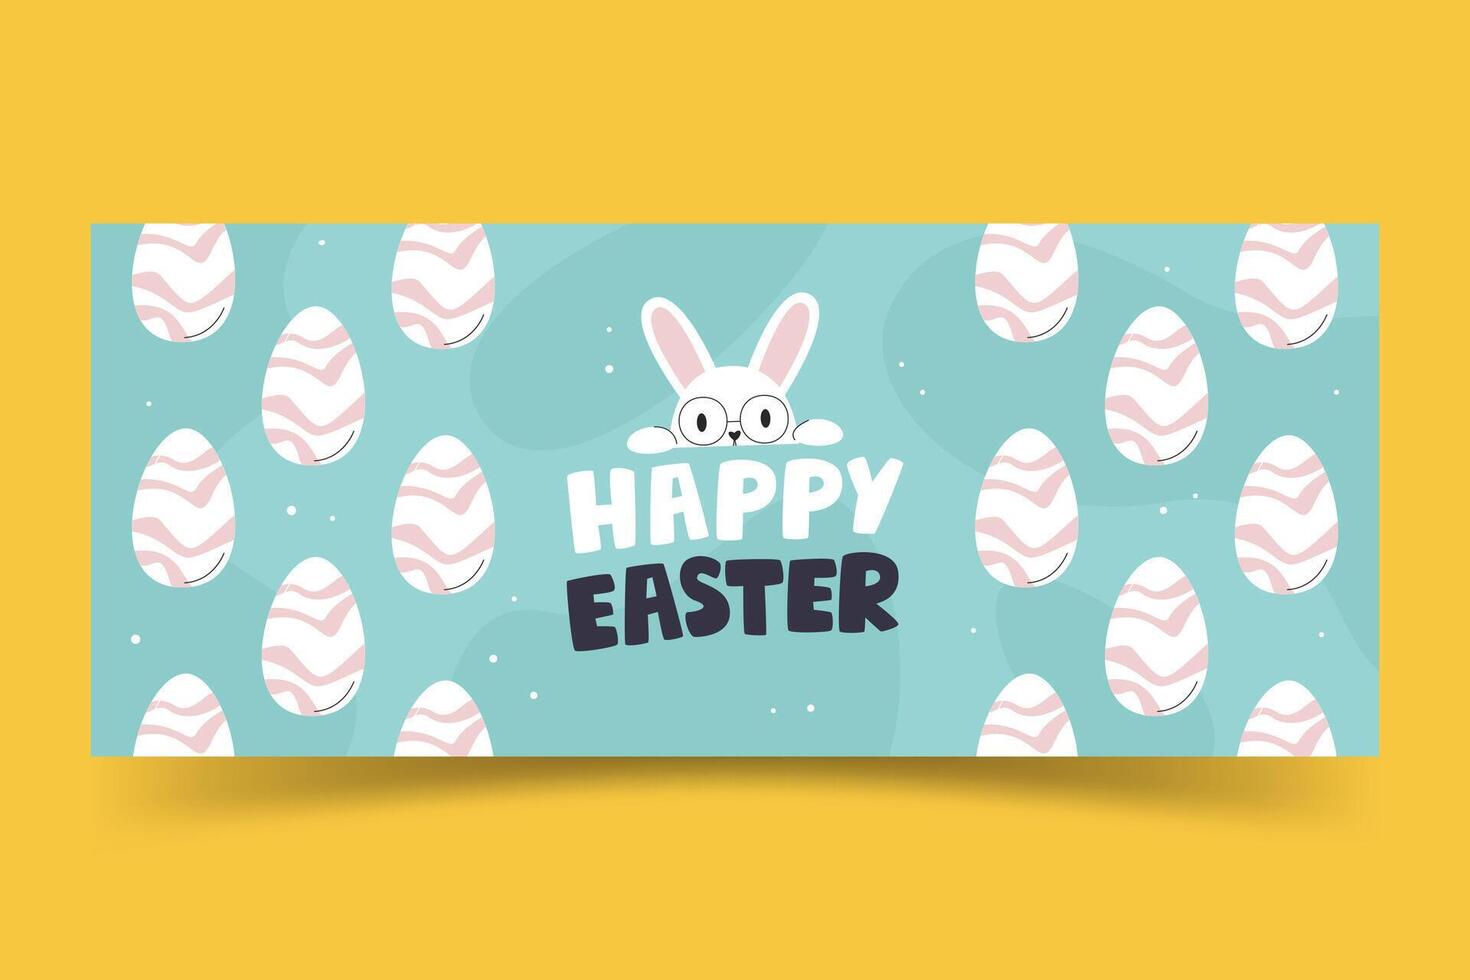 Horizontal symmetrical banner with Easter bunny and eggs. Festive handwritten lettering concept design. Cute holiday and celebration greeting template. Happy Easter hand drawn flat vector illustration